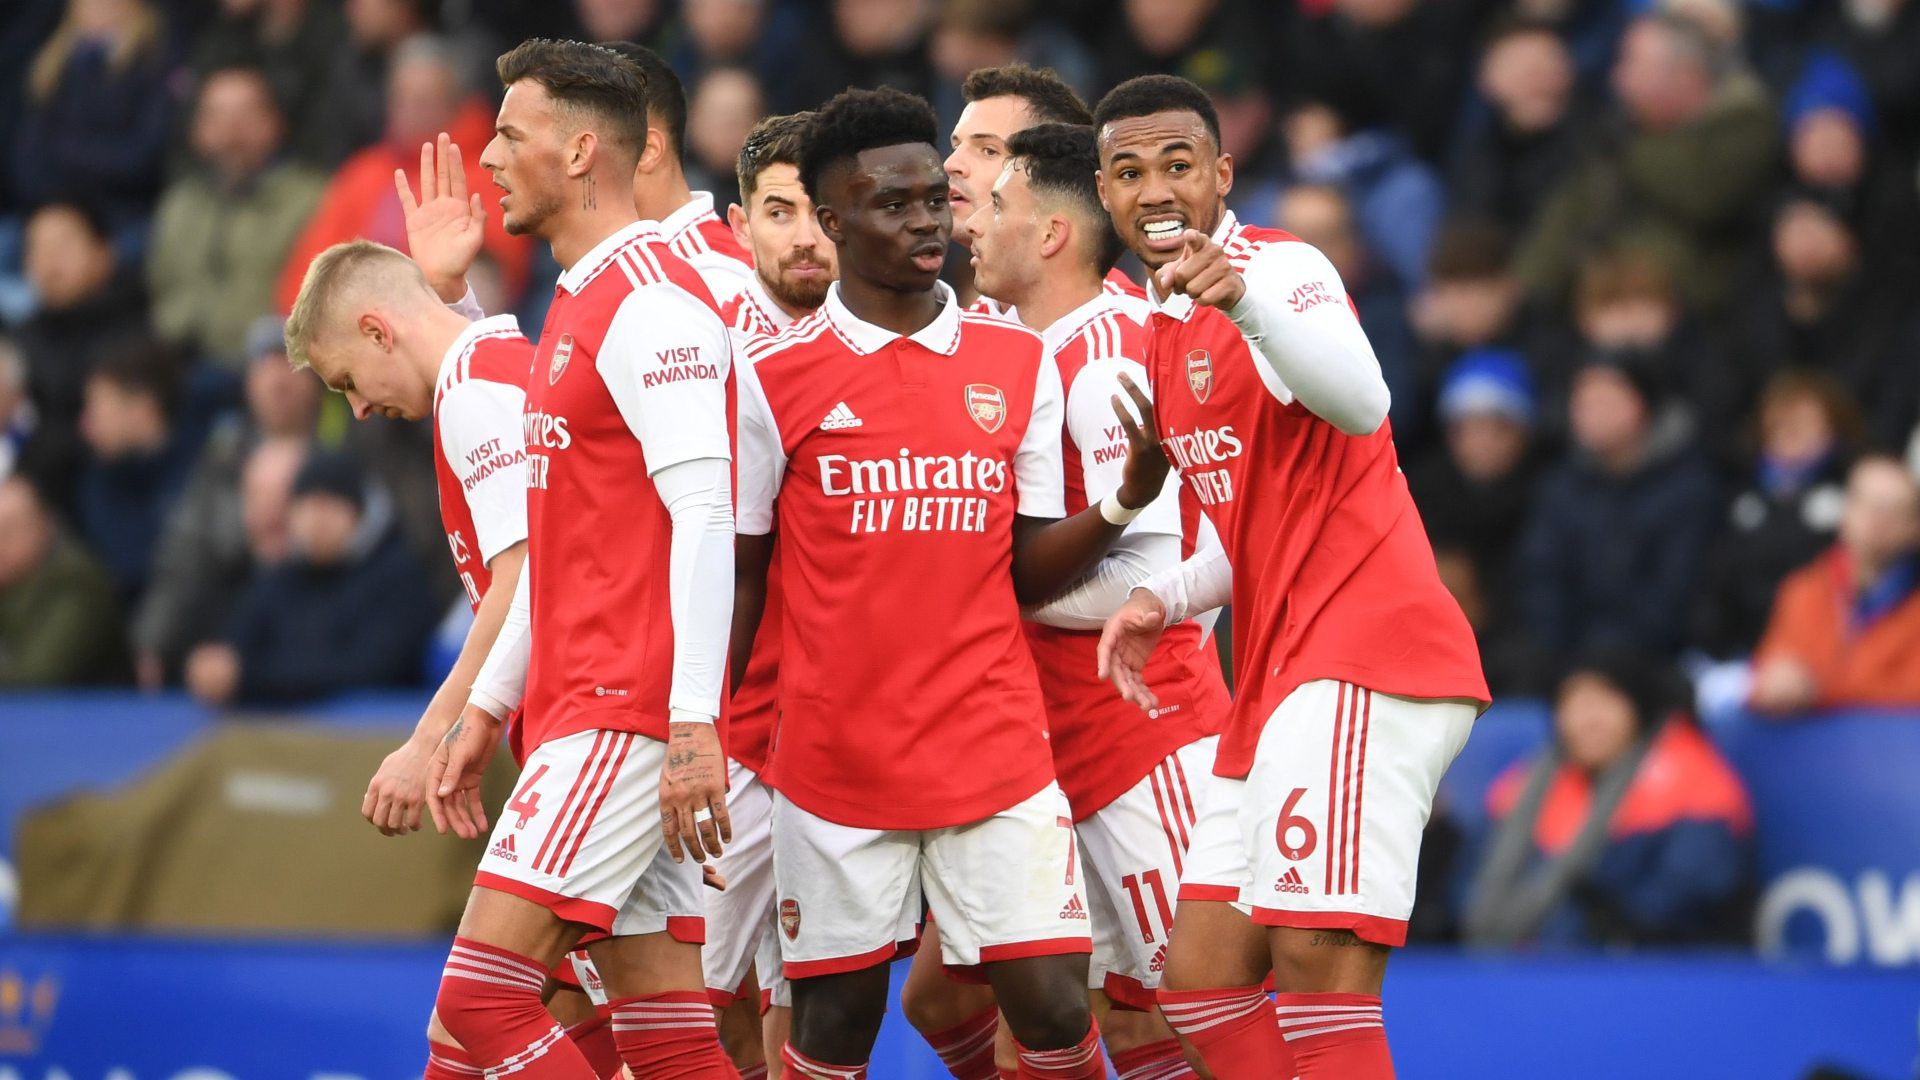 Match Report  Colchester United 3-0 Arsenal - News - Colchester